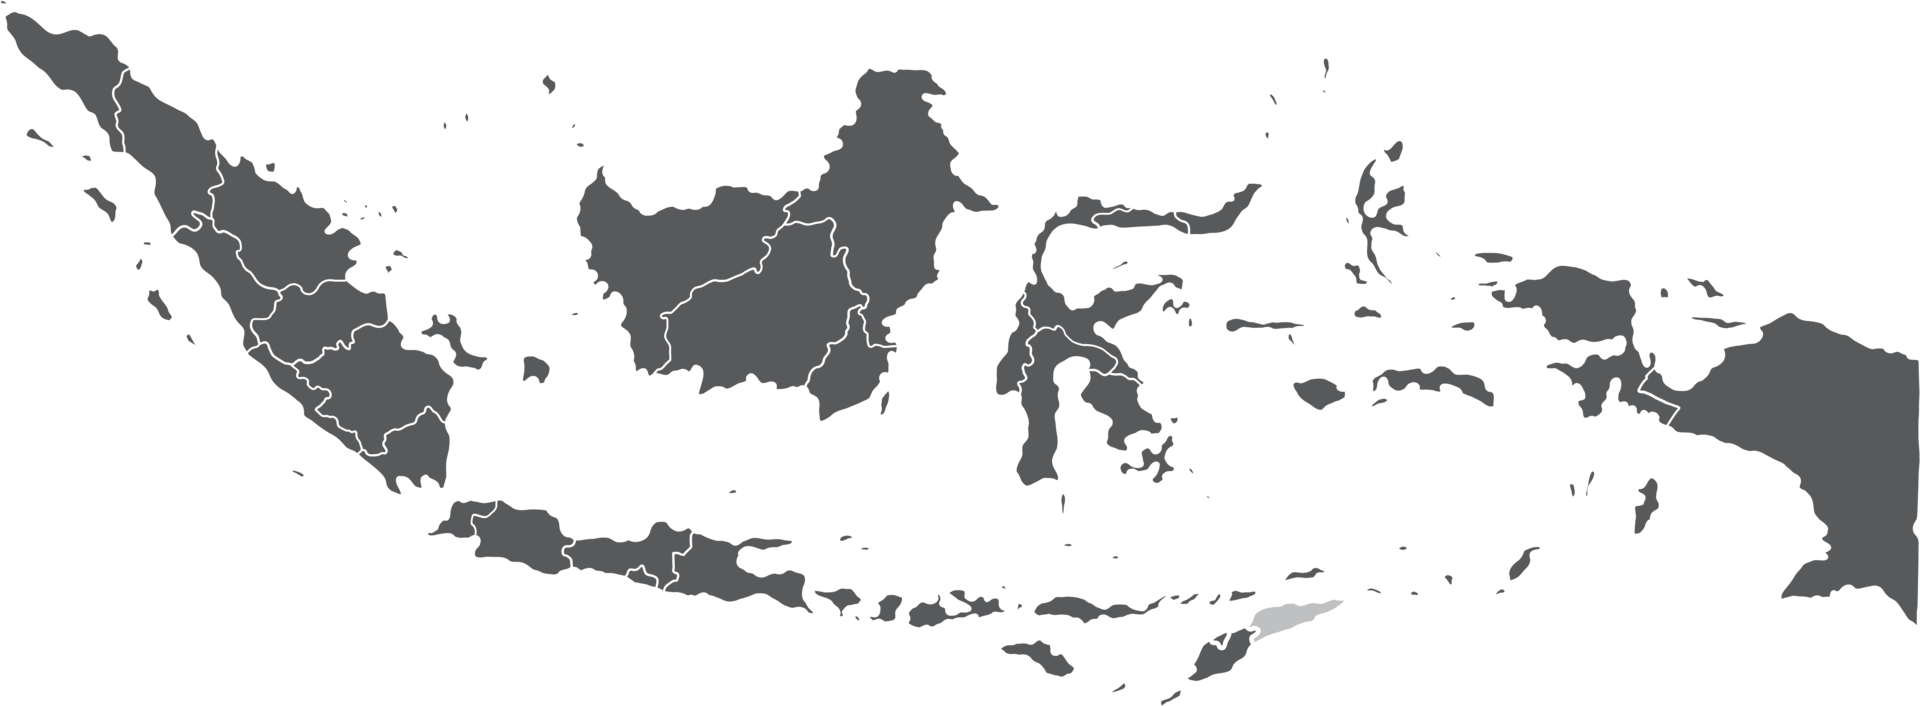 doodle freehand drawing of indonesia map. png